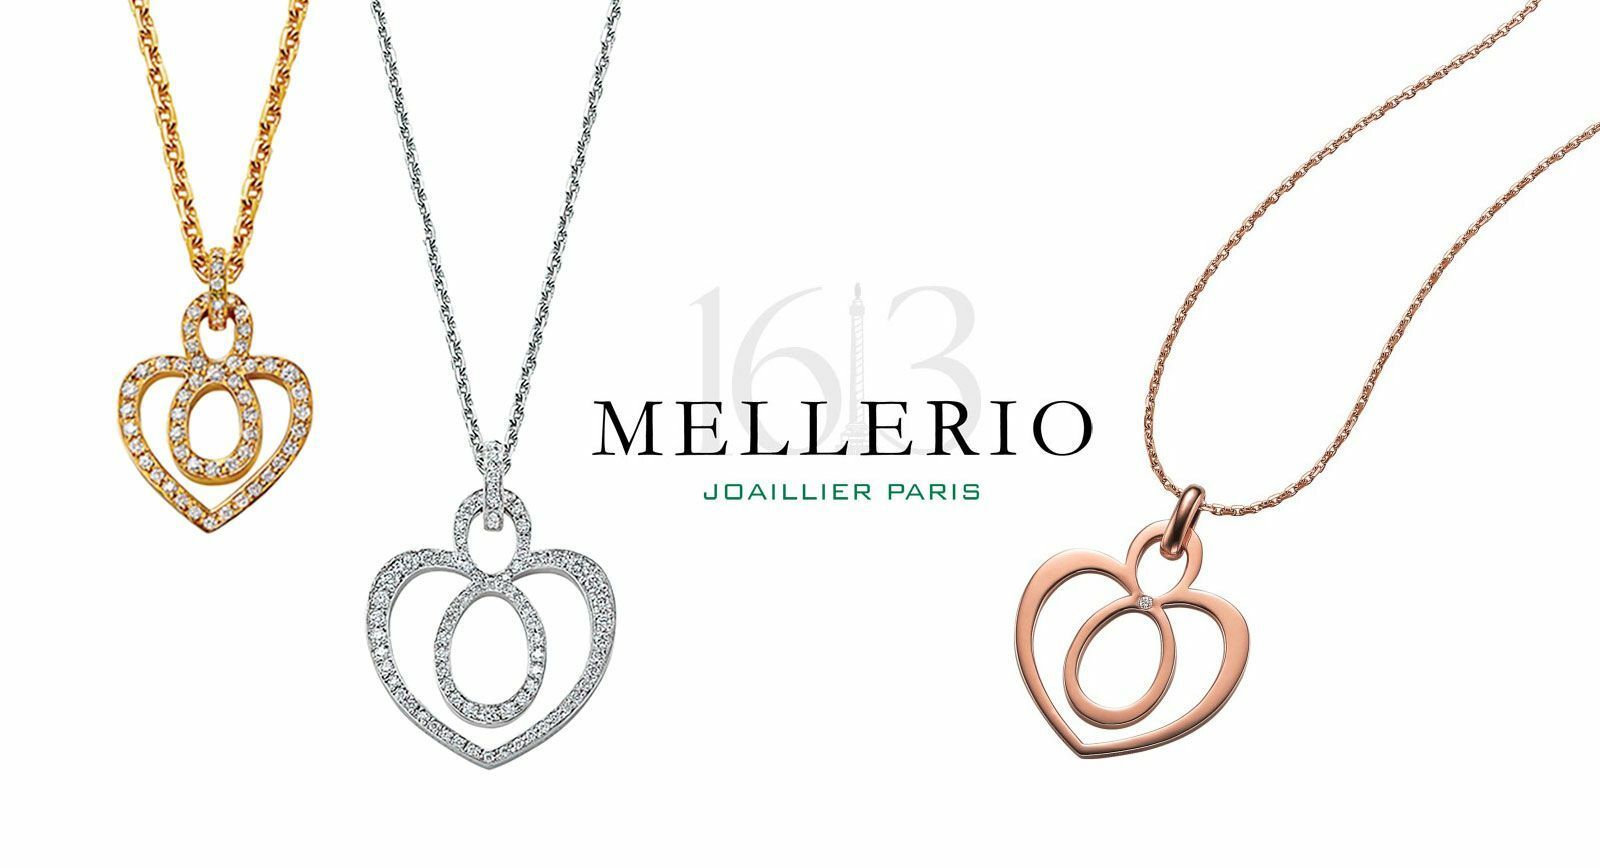 Infinity Heart from Mellerio dits Meller: a Proclamation of Love in Jewellery Form